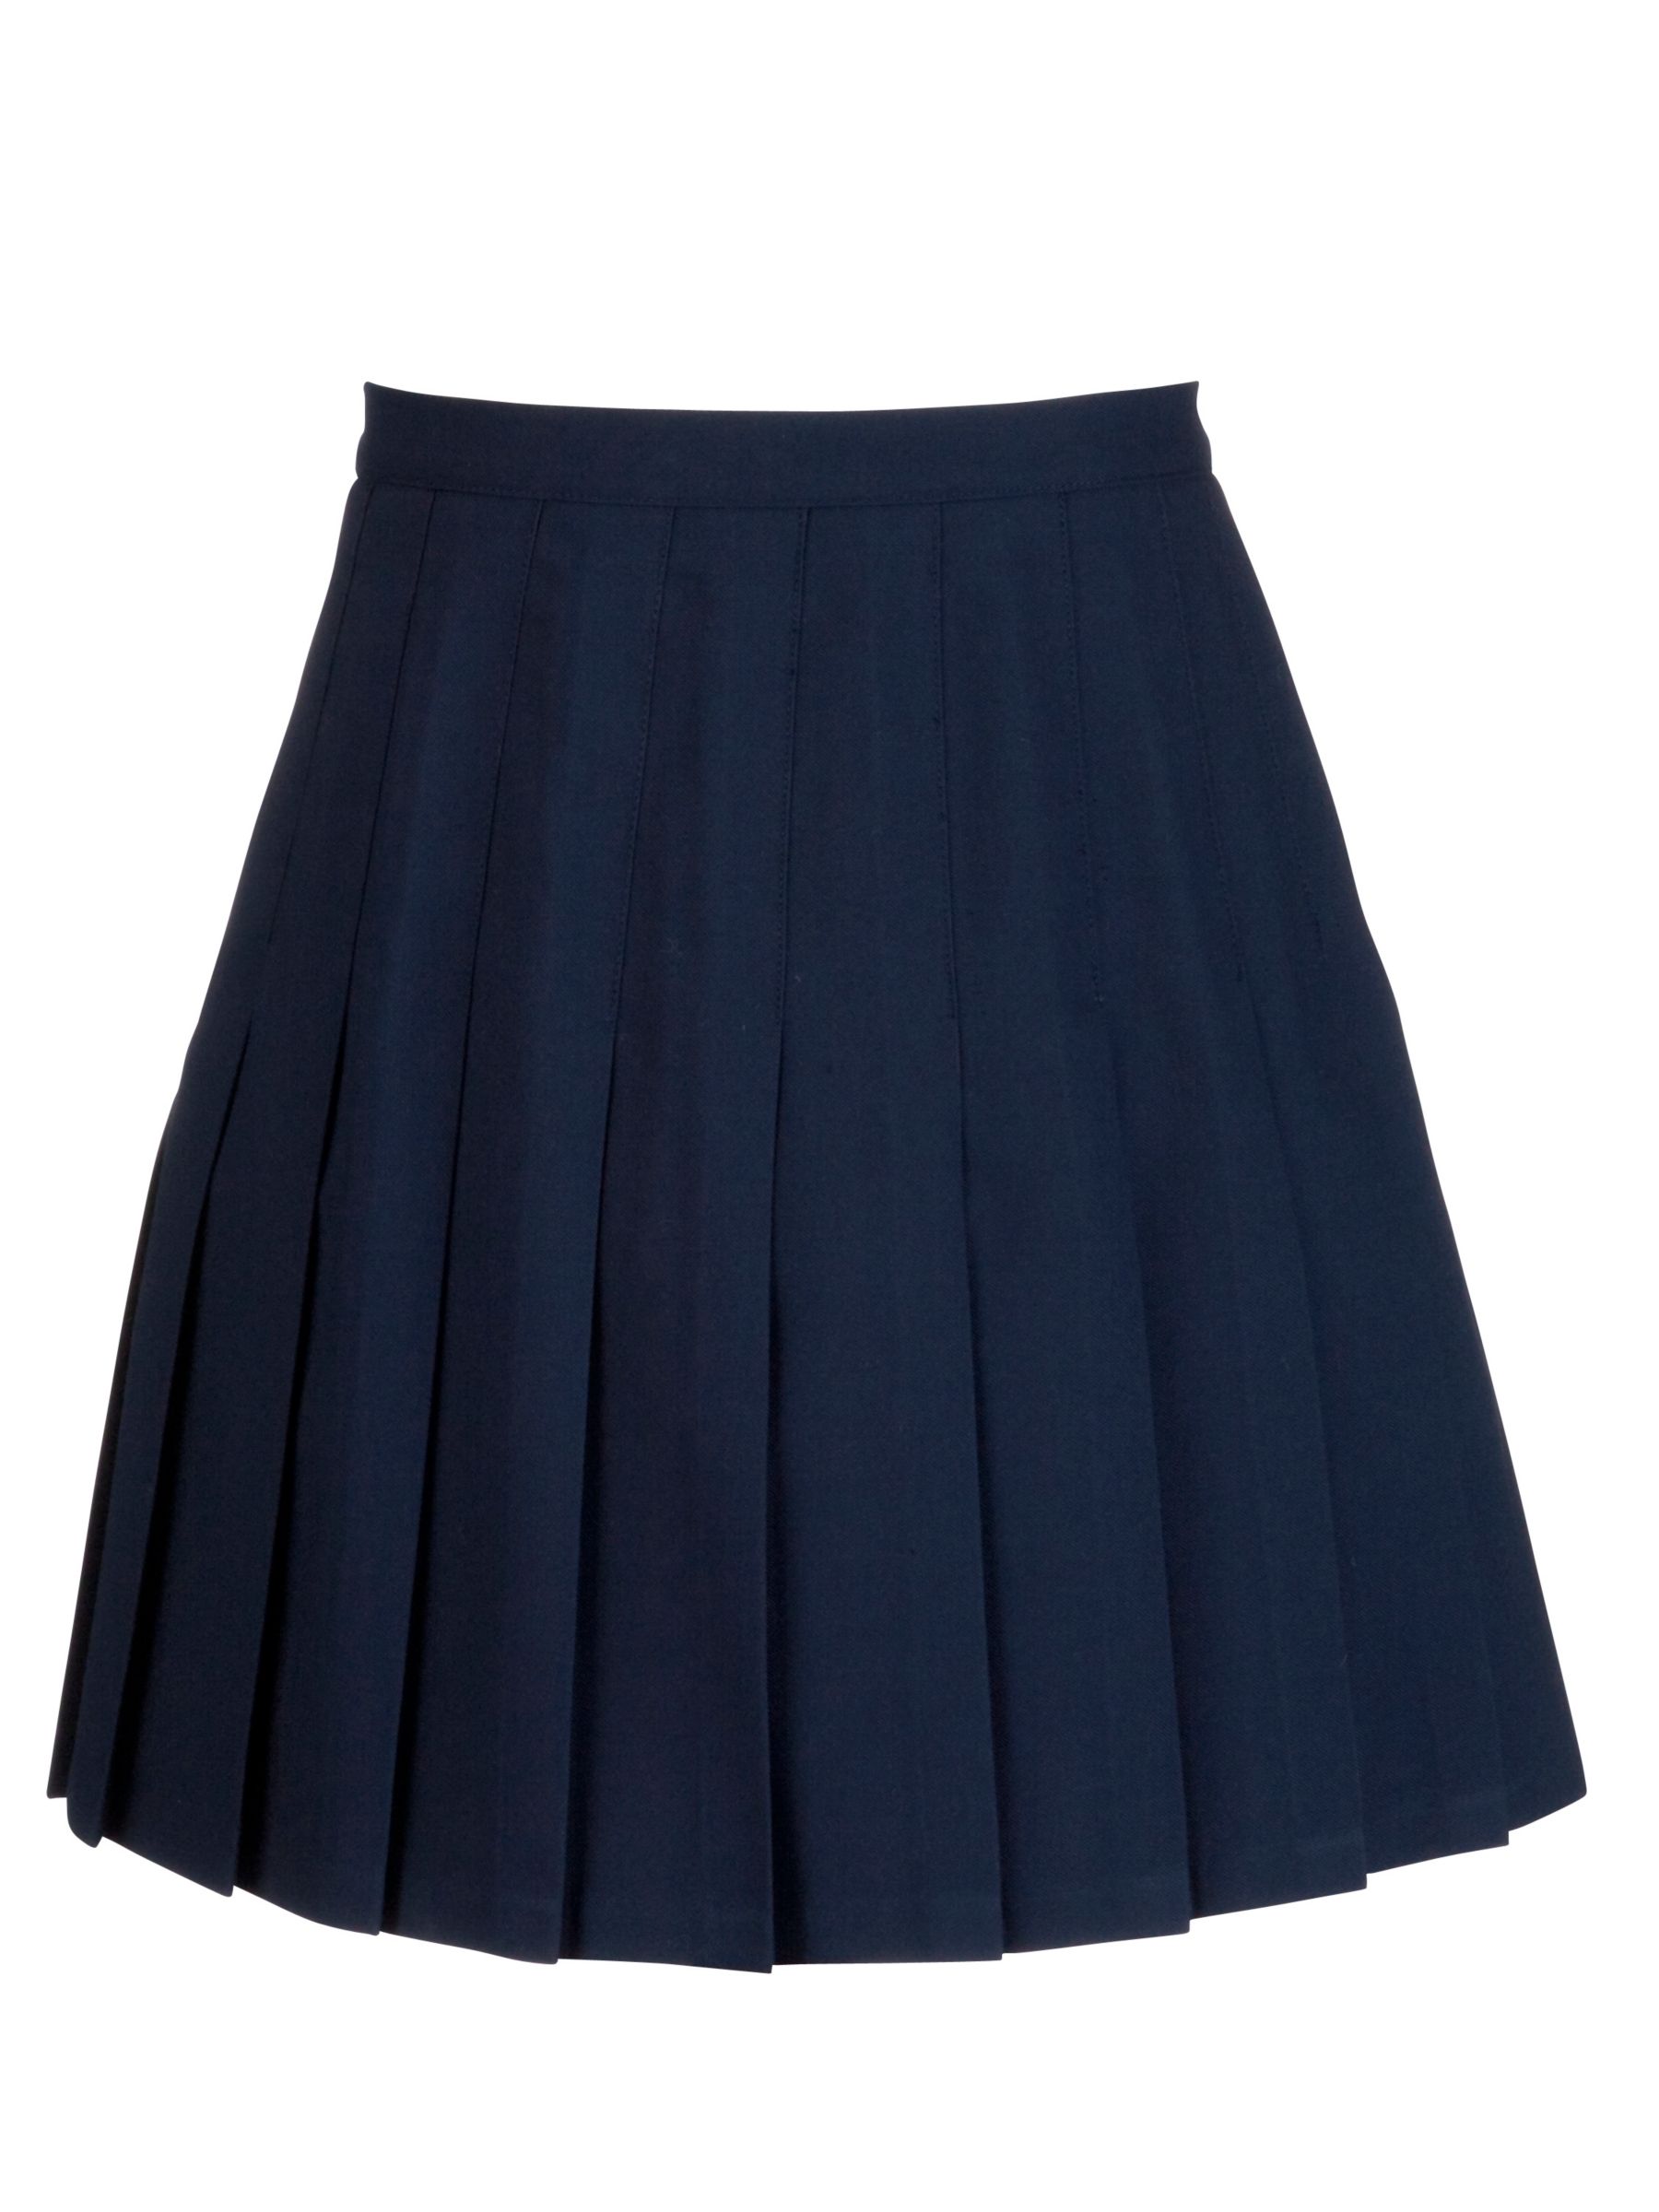 School Girls Knife Pleat Skirt Navy At John Lewis And Partners